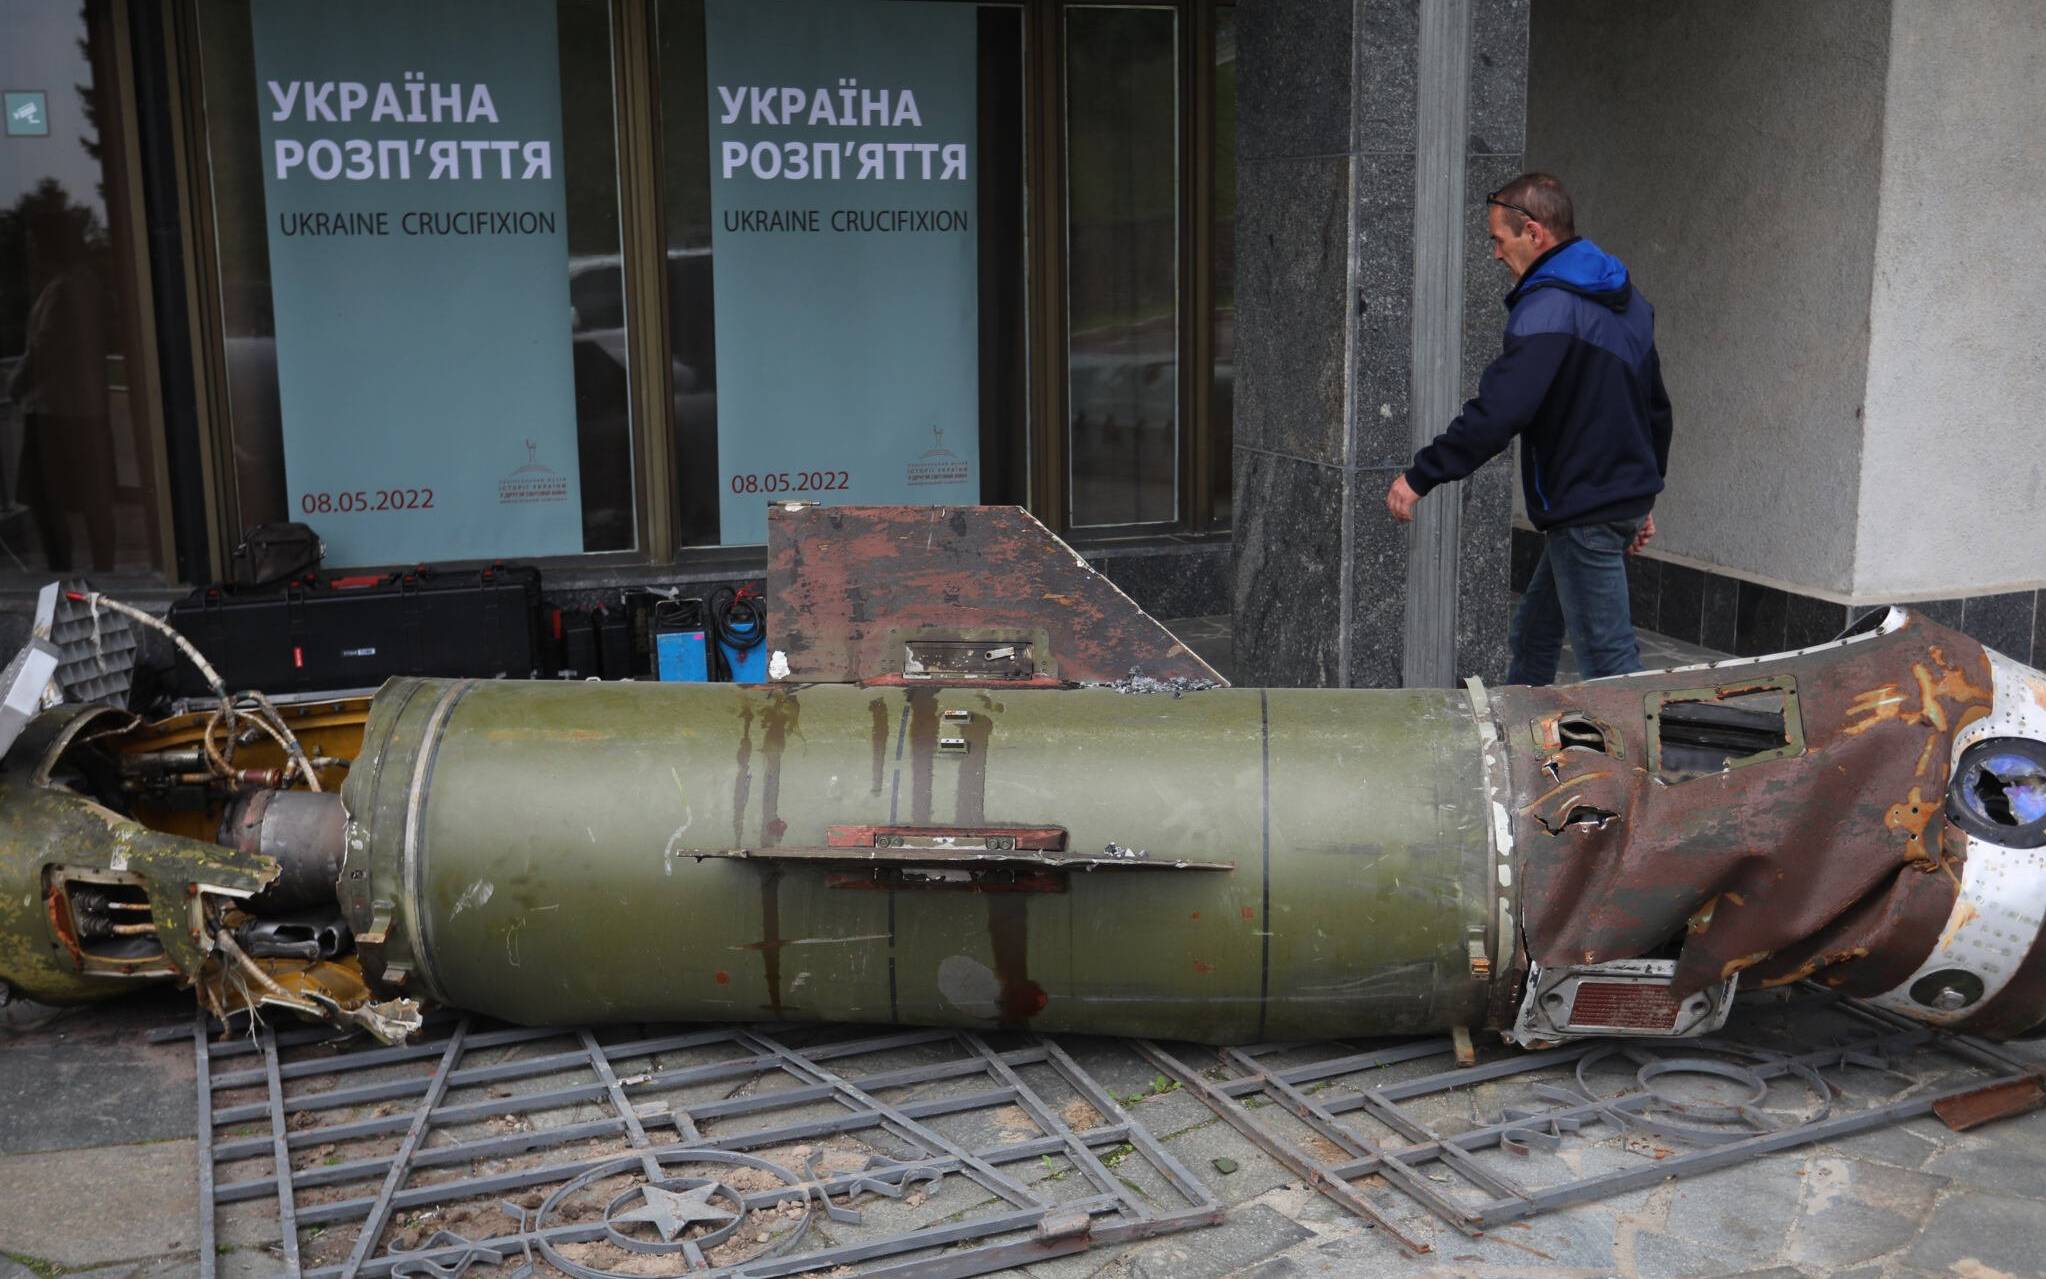 A visitor walks past the remains of a missile from the recent Ukraine Russia conflict, at the entrance to the World War II open-air museum in Kyiv on May 8, 2022, a day before 'Victory Day' is commemorated in Ukraine. (Photo by Aleksey Filippov / AFP)